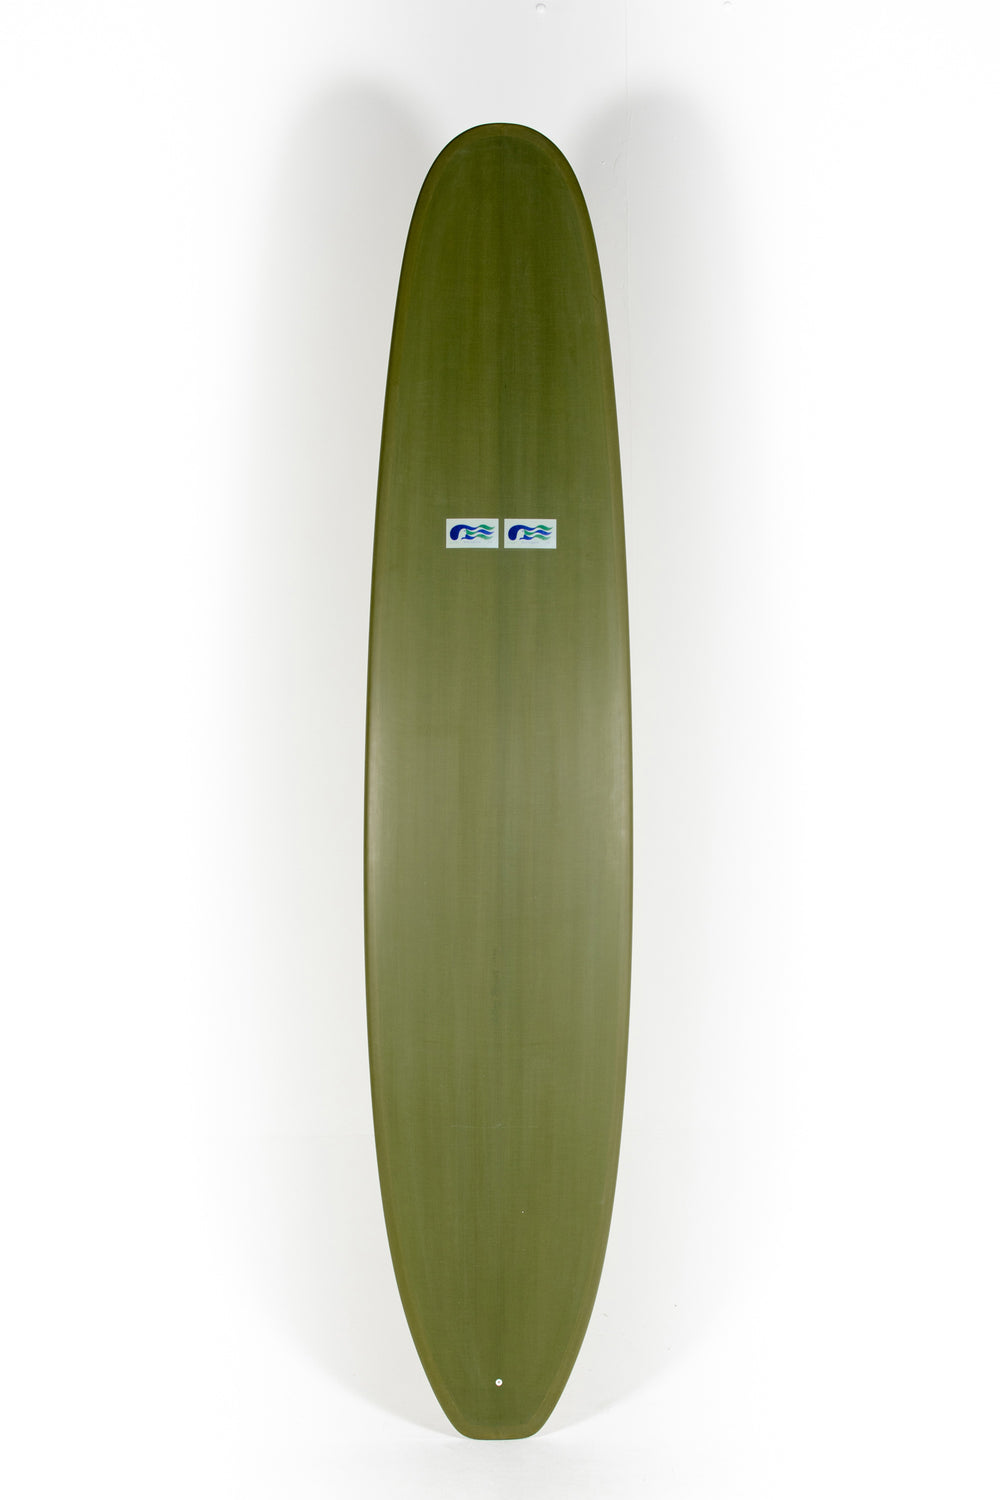 Pukas-Surf-Shop-Alex-Knost-BMT-Personal-9_3_-Green-Army